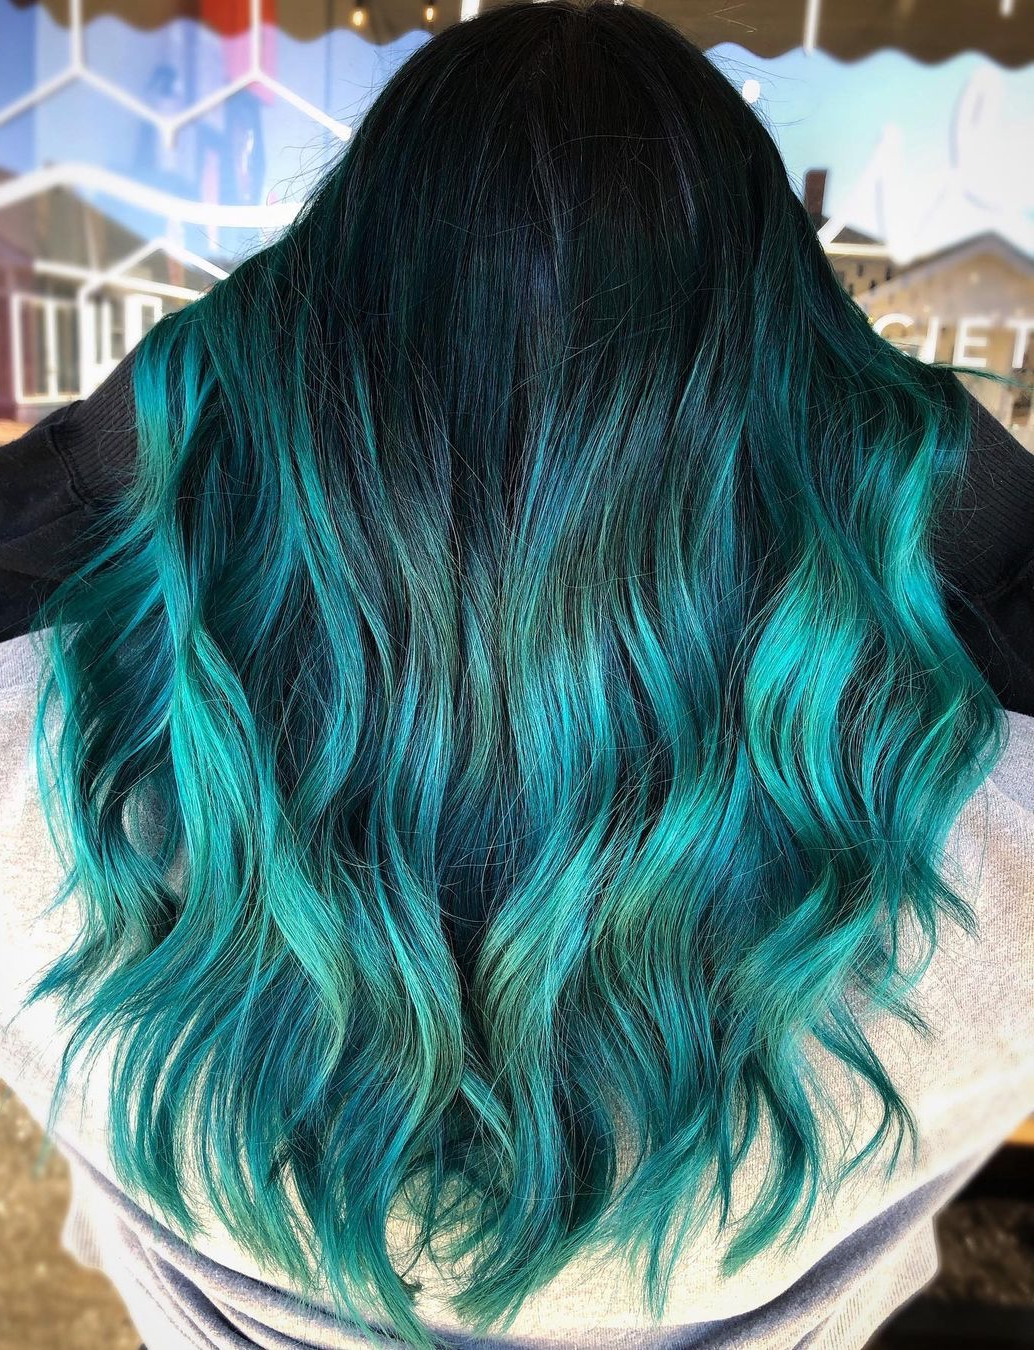 Turquoise Blue Ombre Hair with Dark Roots